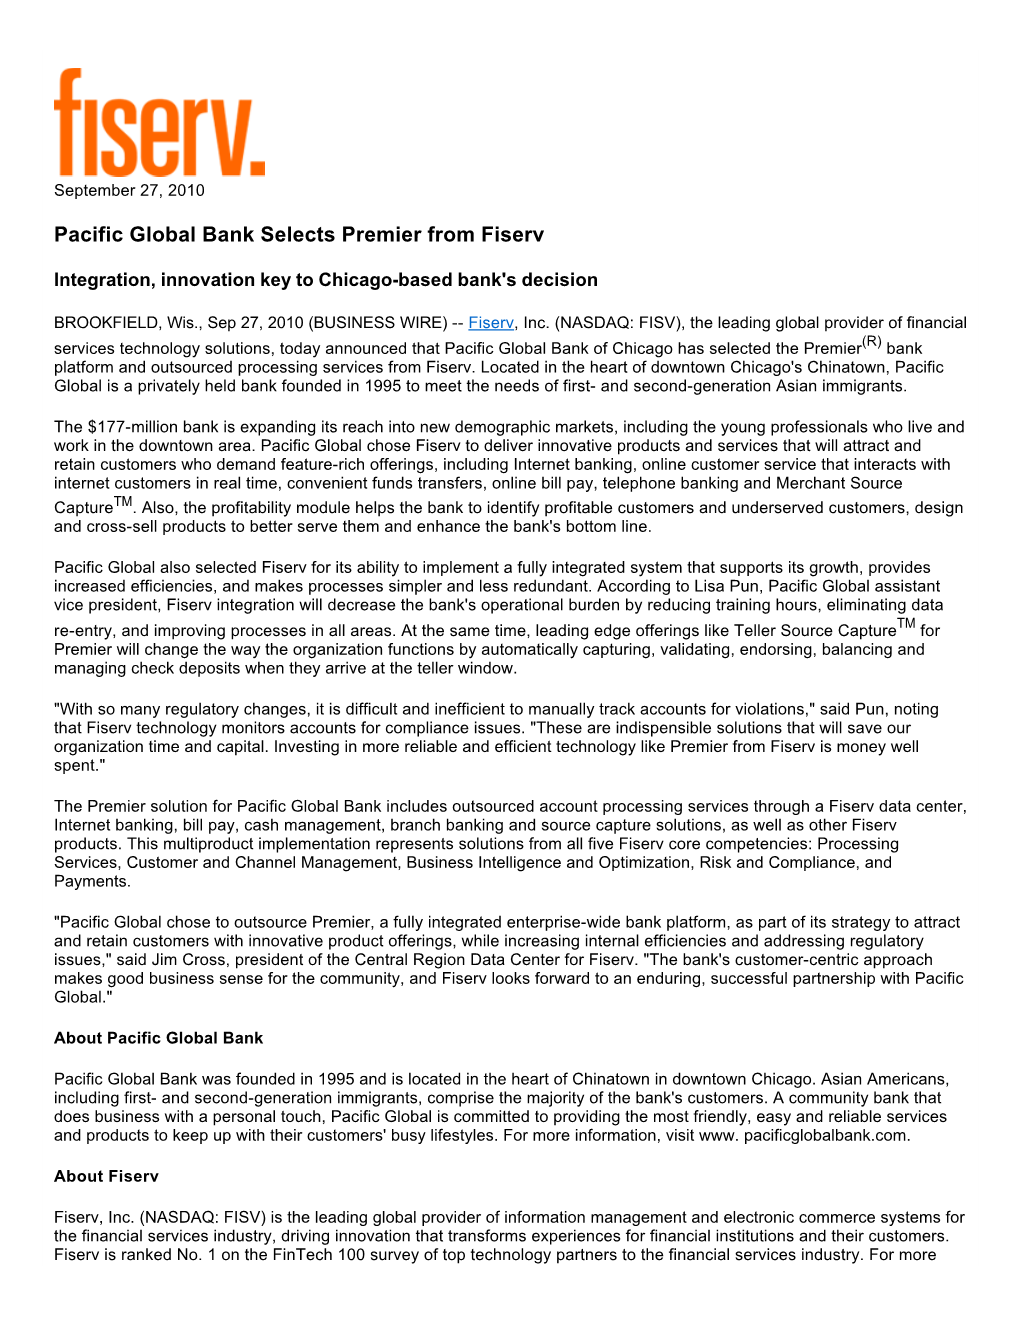 Pacific Global Bank Selects Premier from Fiserv